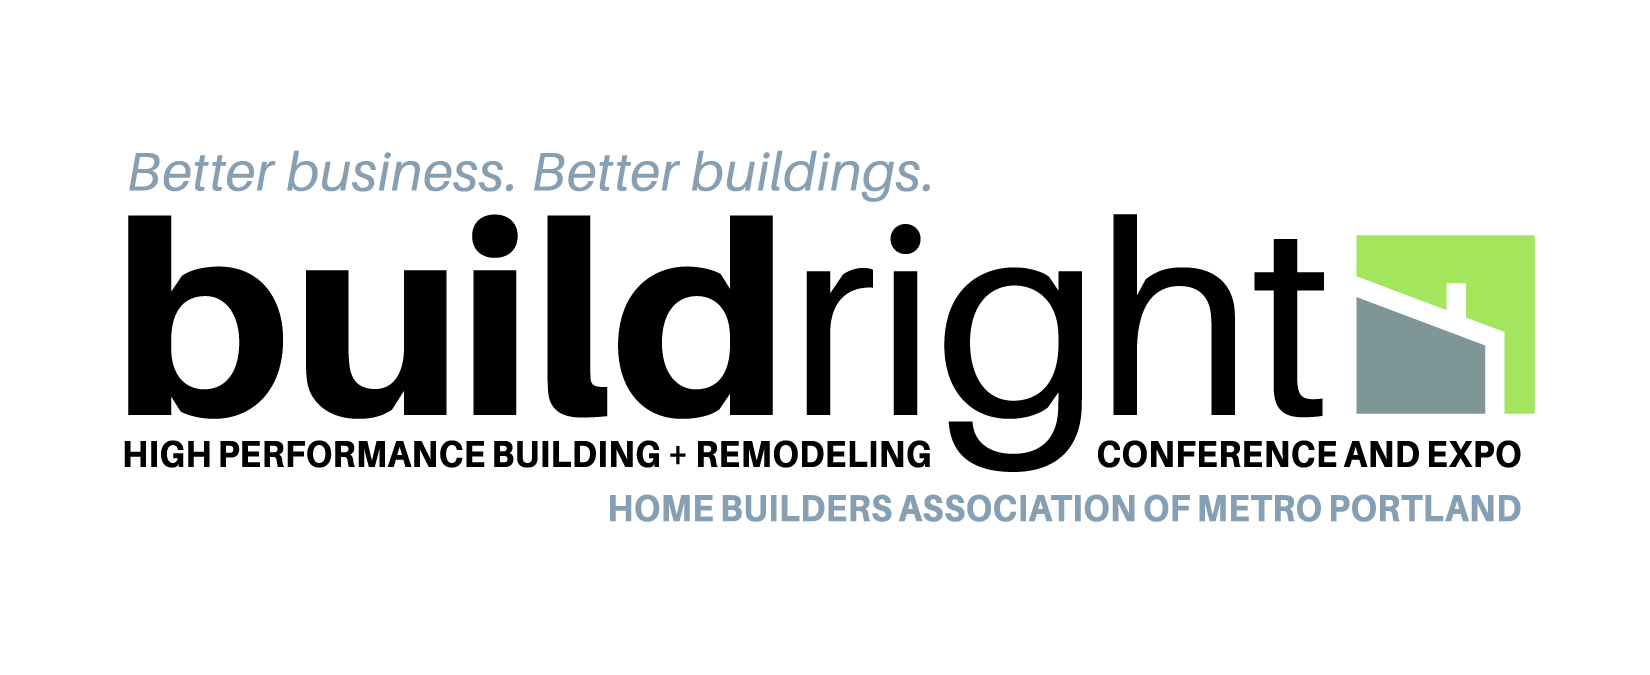 2021 Buildright Conference & Expo